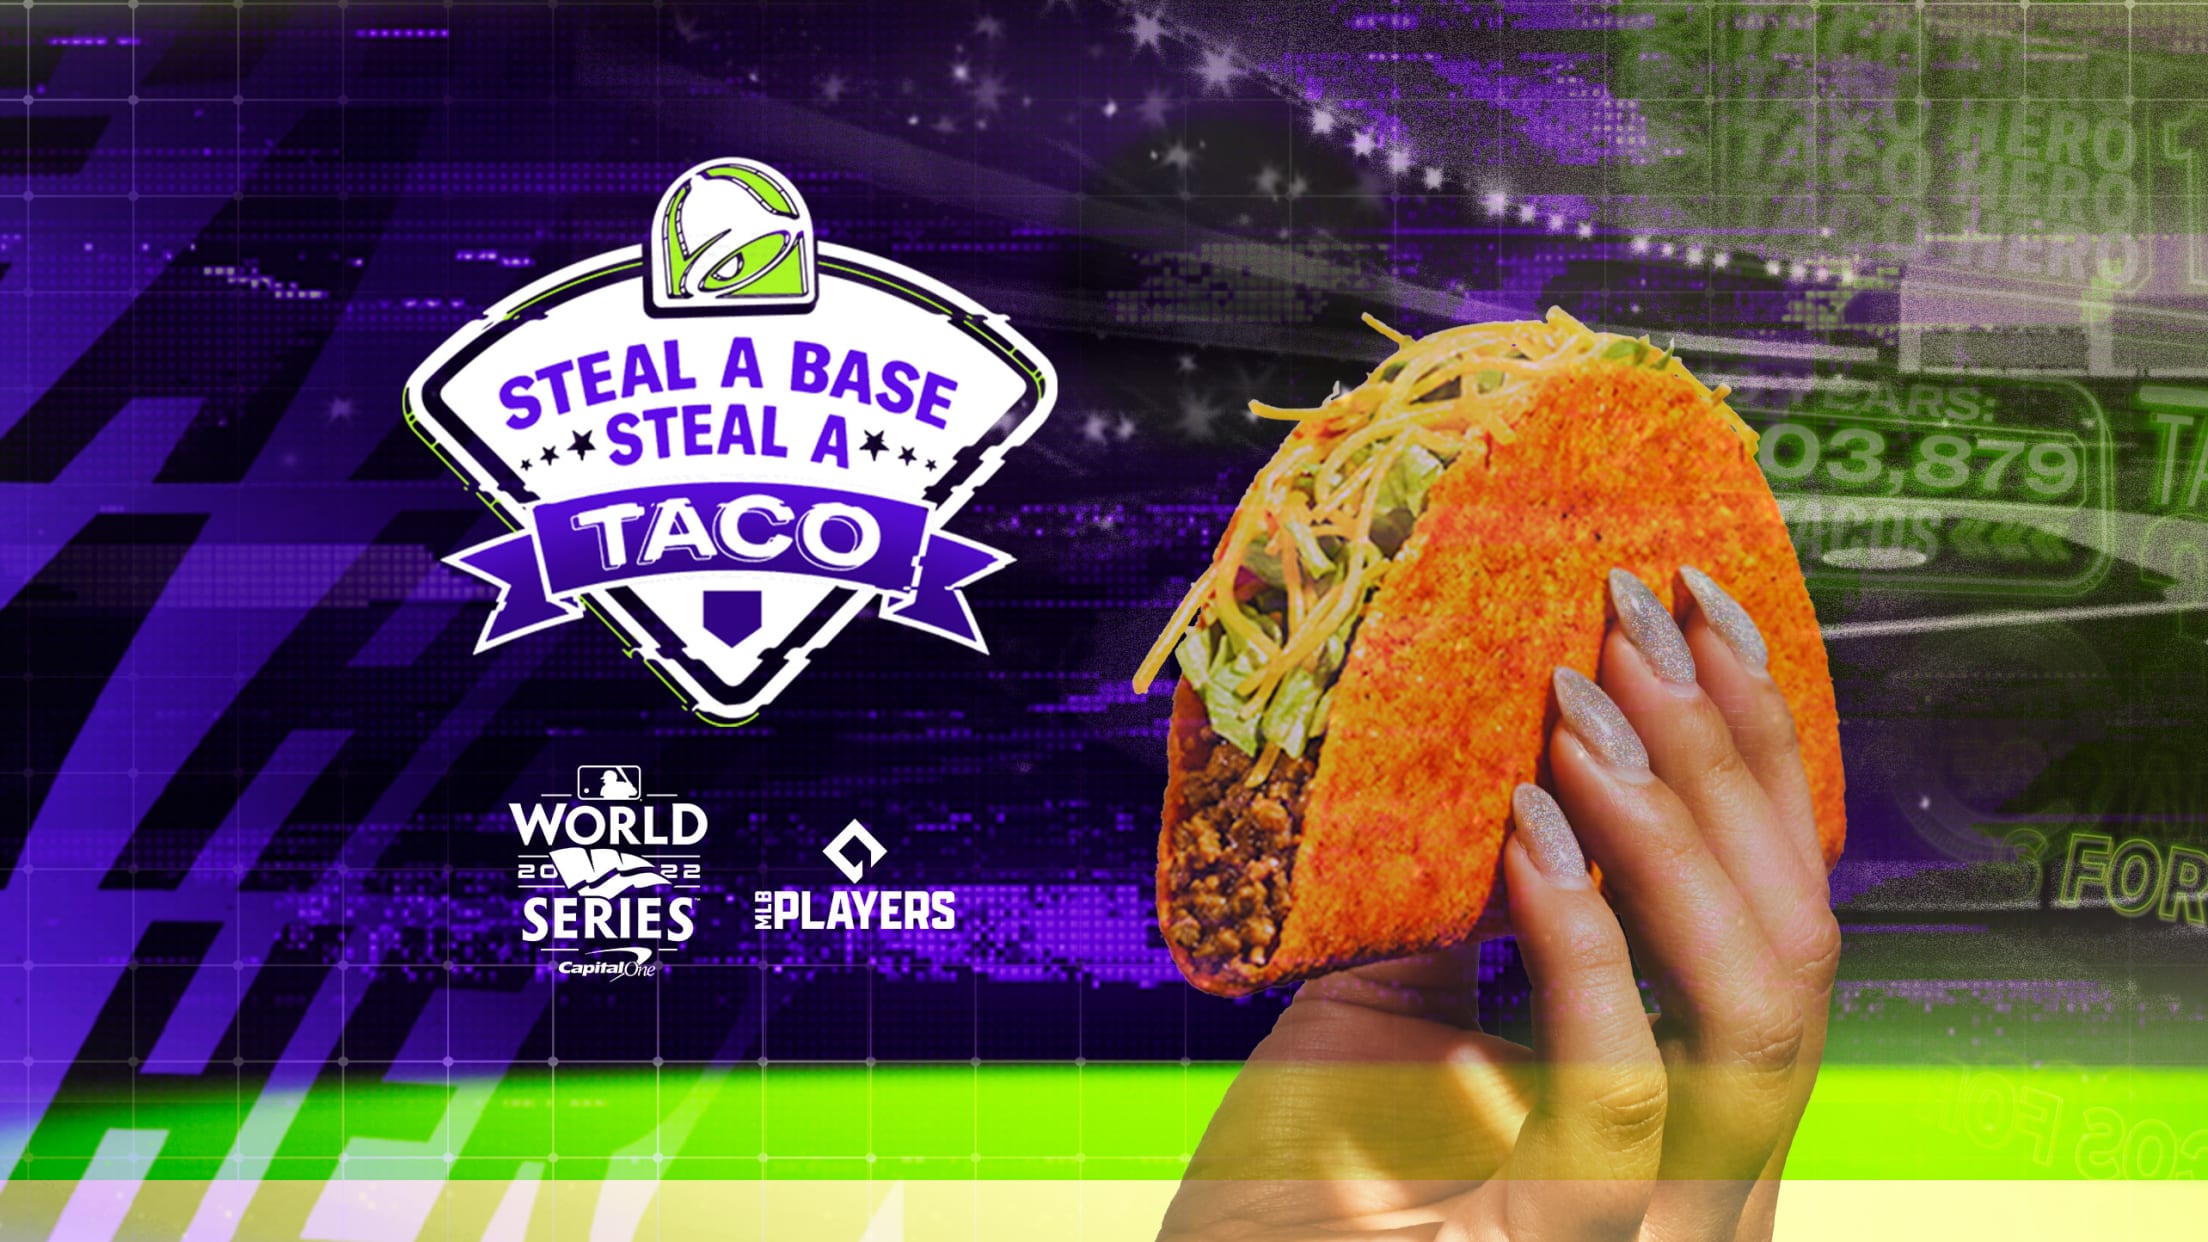 A hand holds a taco, with the Steal a Base, Steal a Taco logo on the left